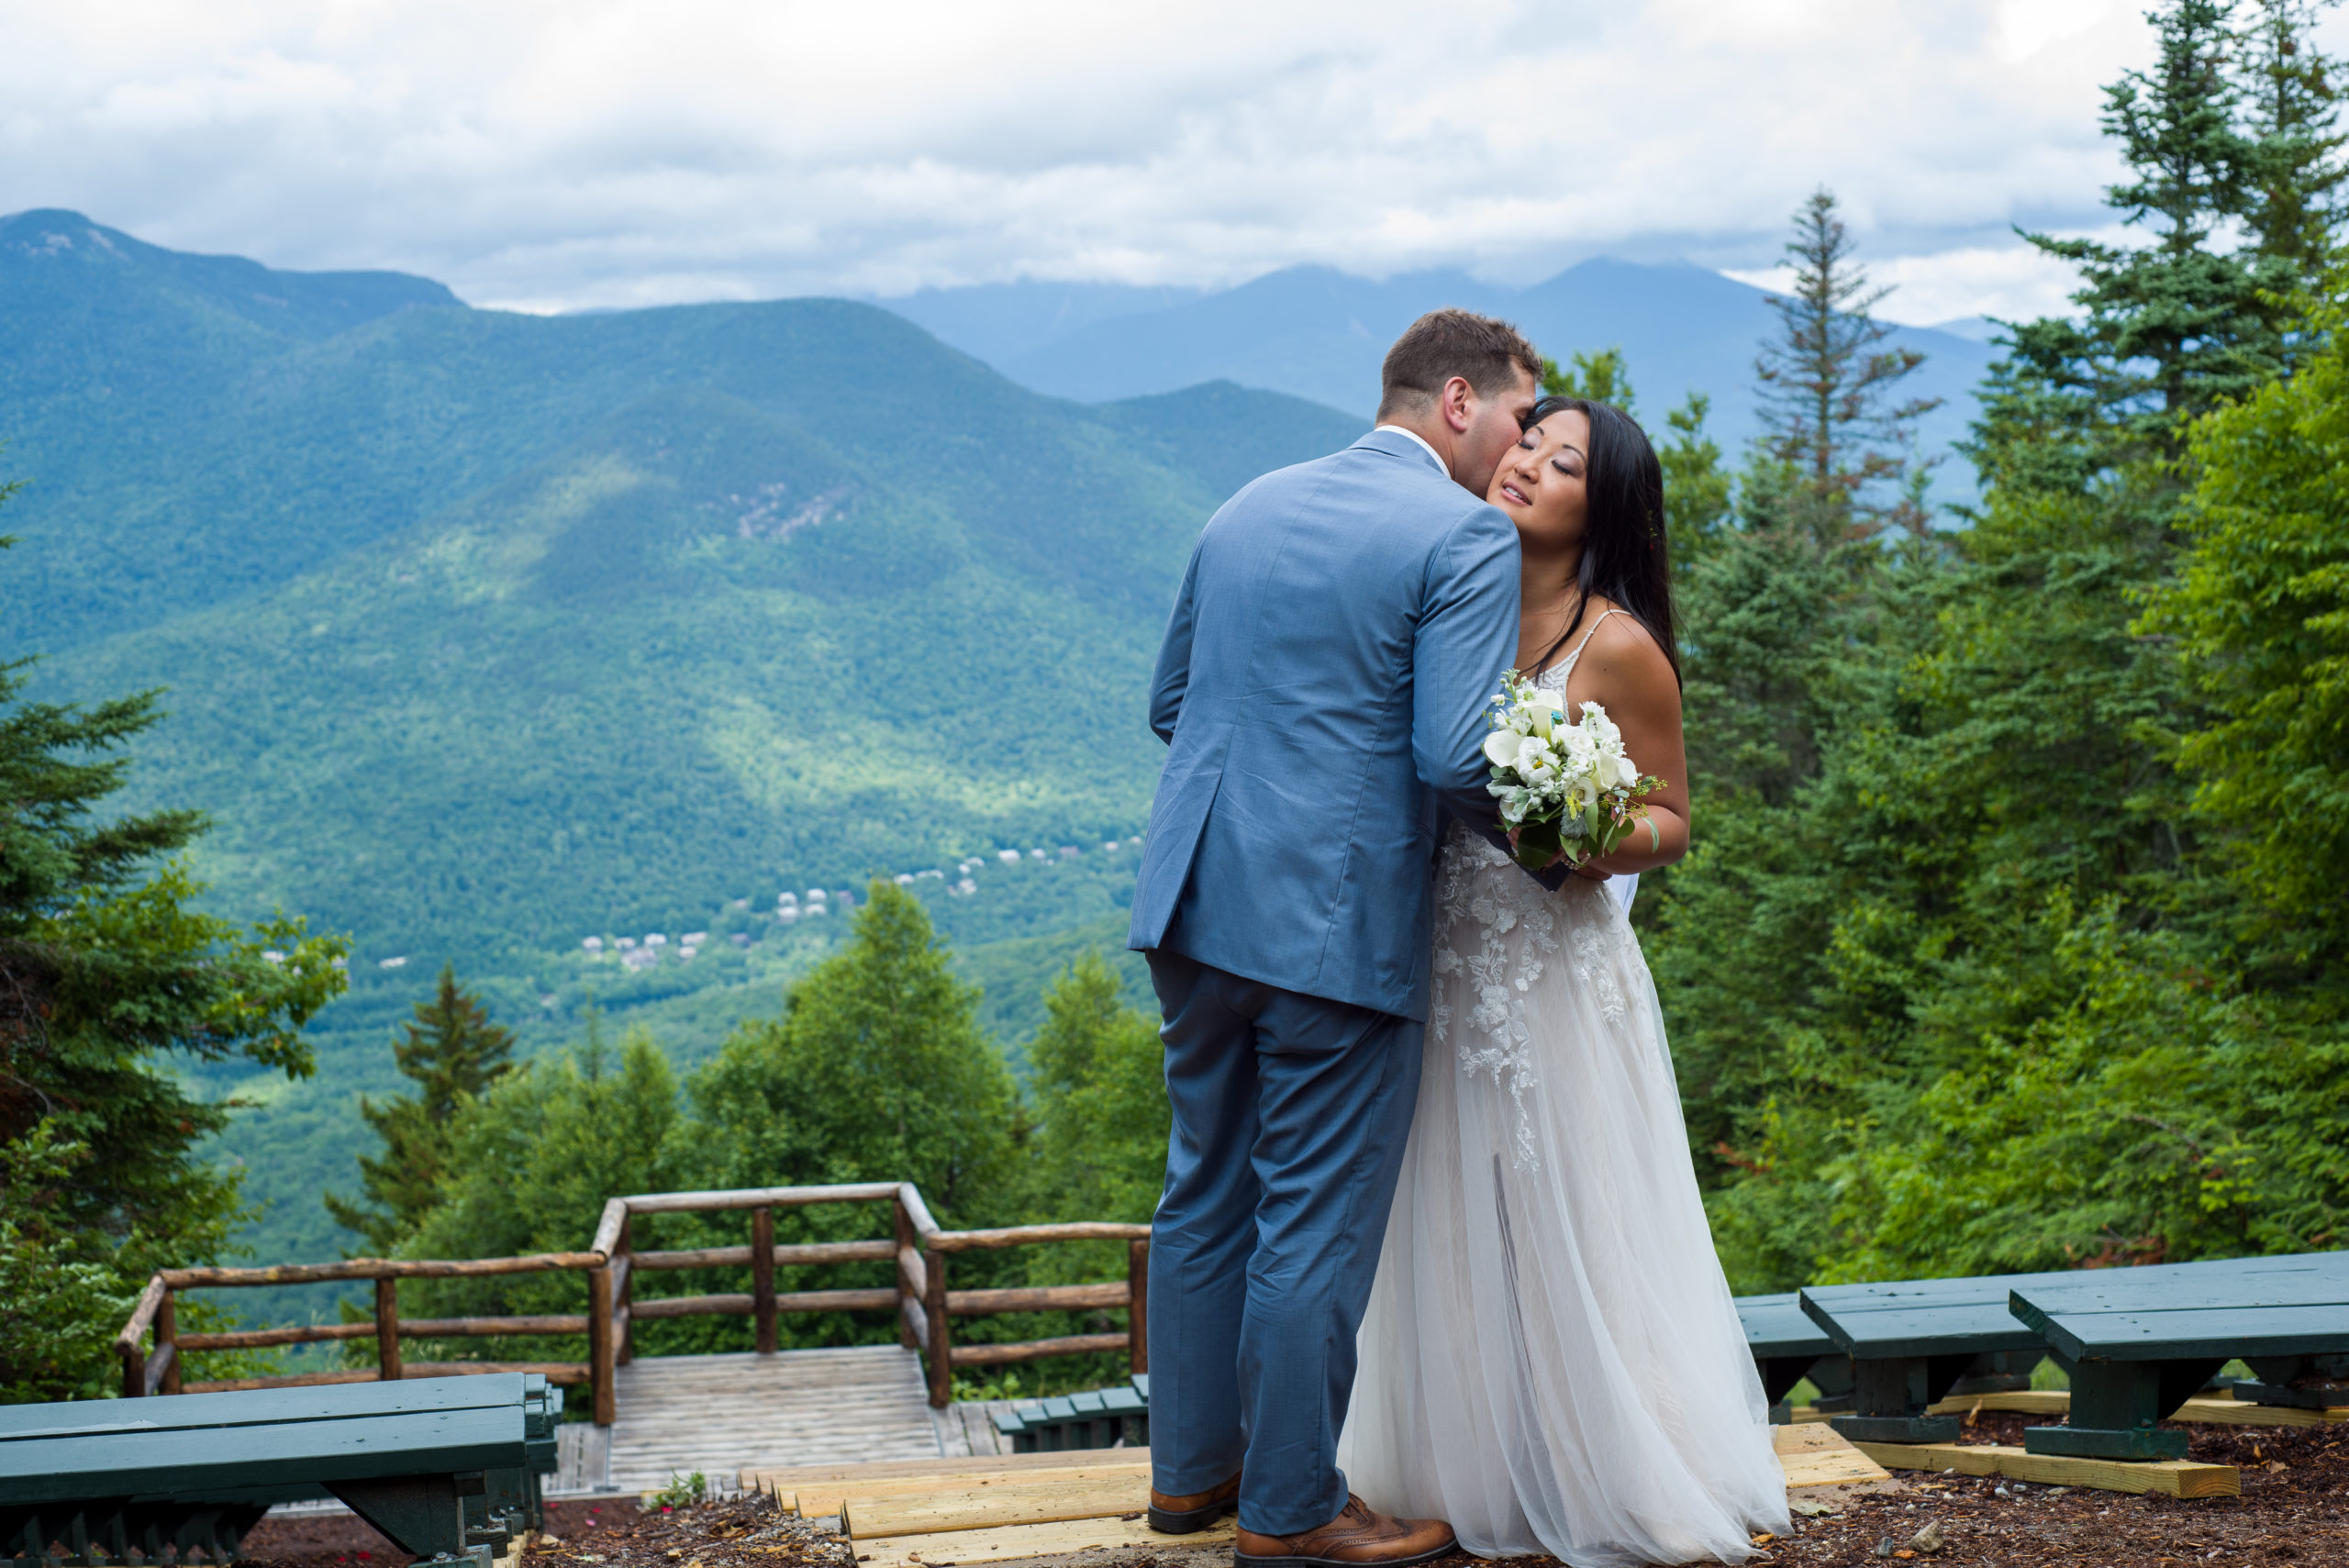 groom whispering into brides ear, bride smiling with the mountains behind them